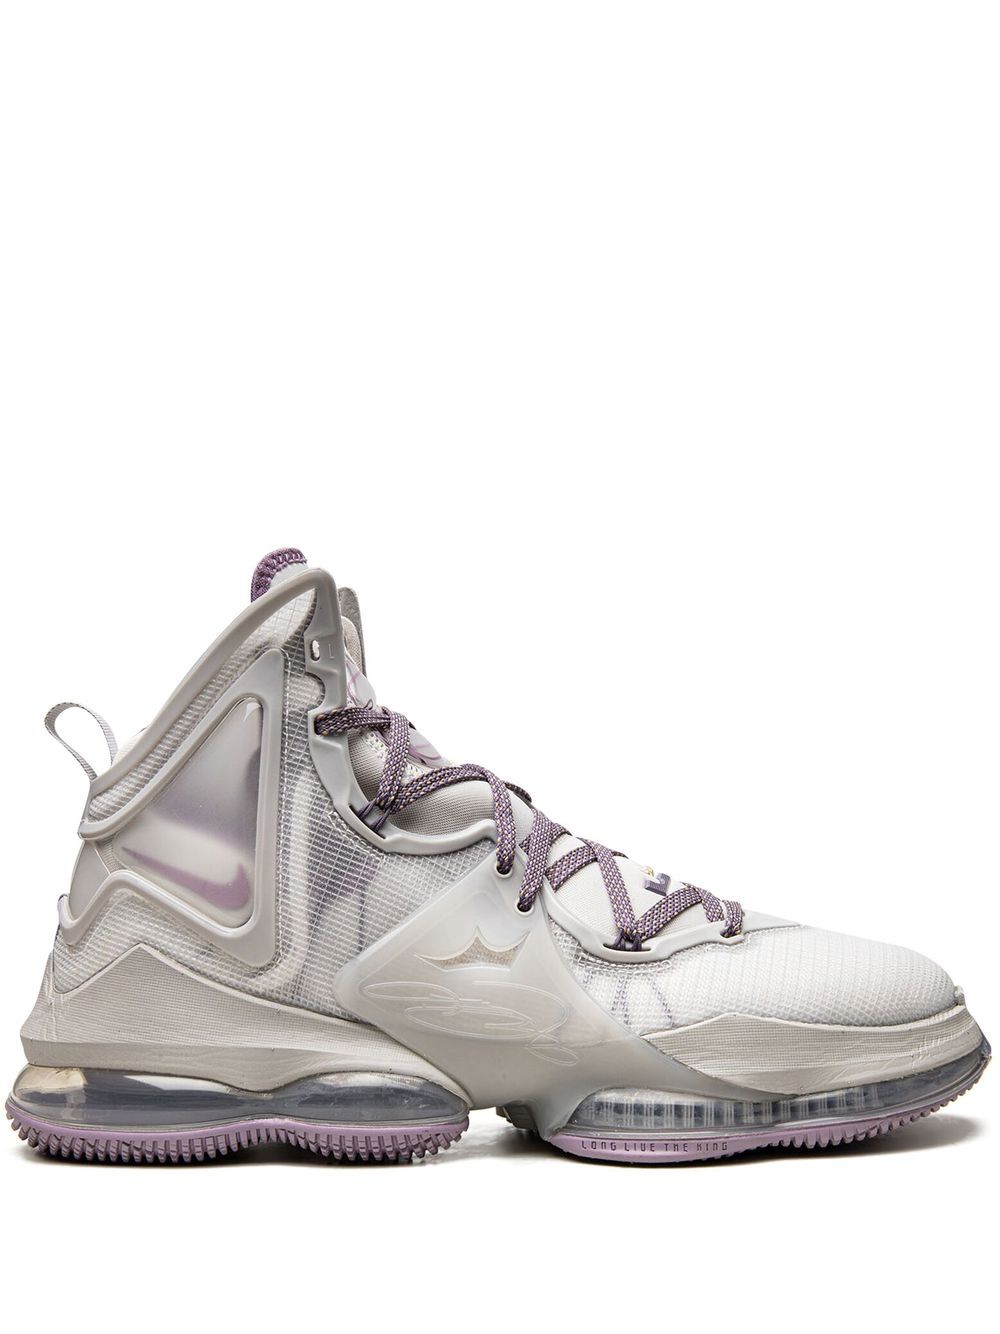 Nike LeBron 19 "Strive For Greatness" sneakers - Grey von Nike